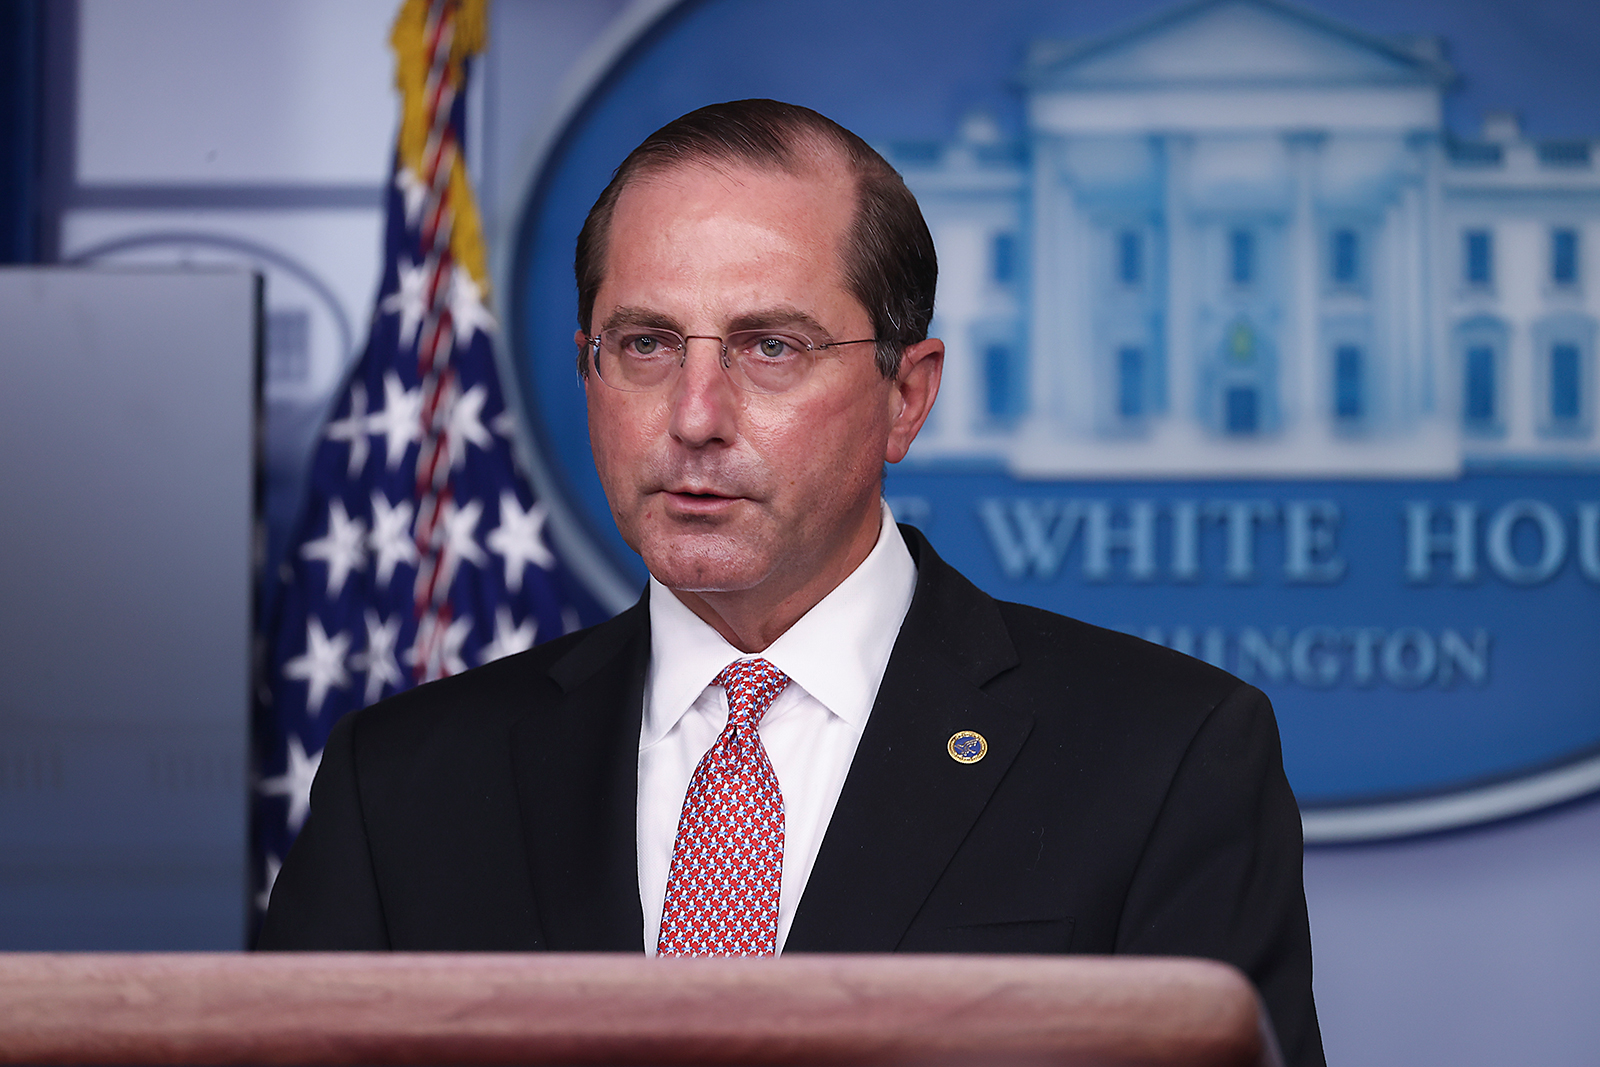 US Secretary of Health and Human Services Alex Azar speaks during a White House Coronavirus Task Force press briefing at the White House in Washington, DC, on November 19, 2020.